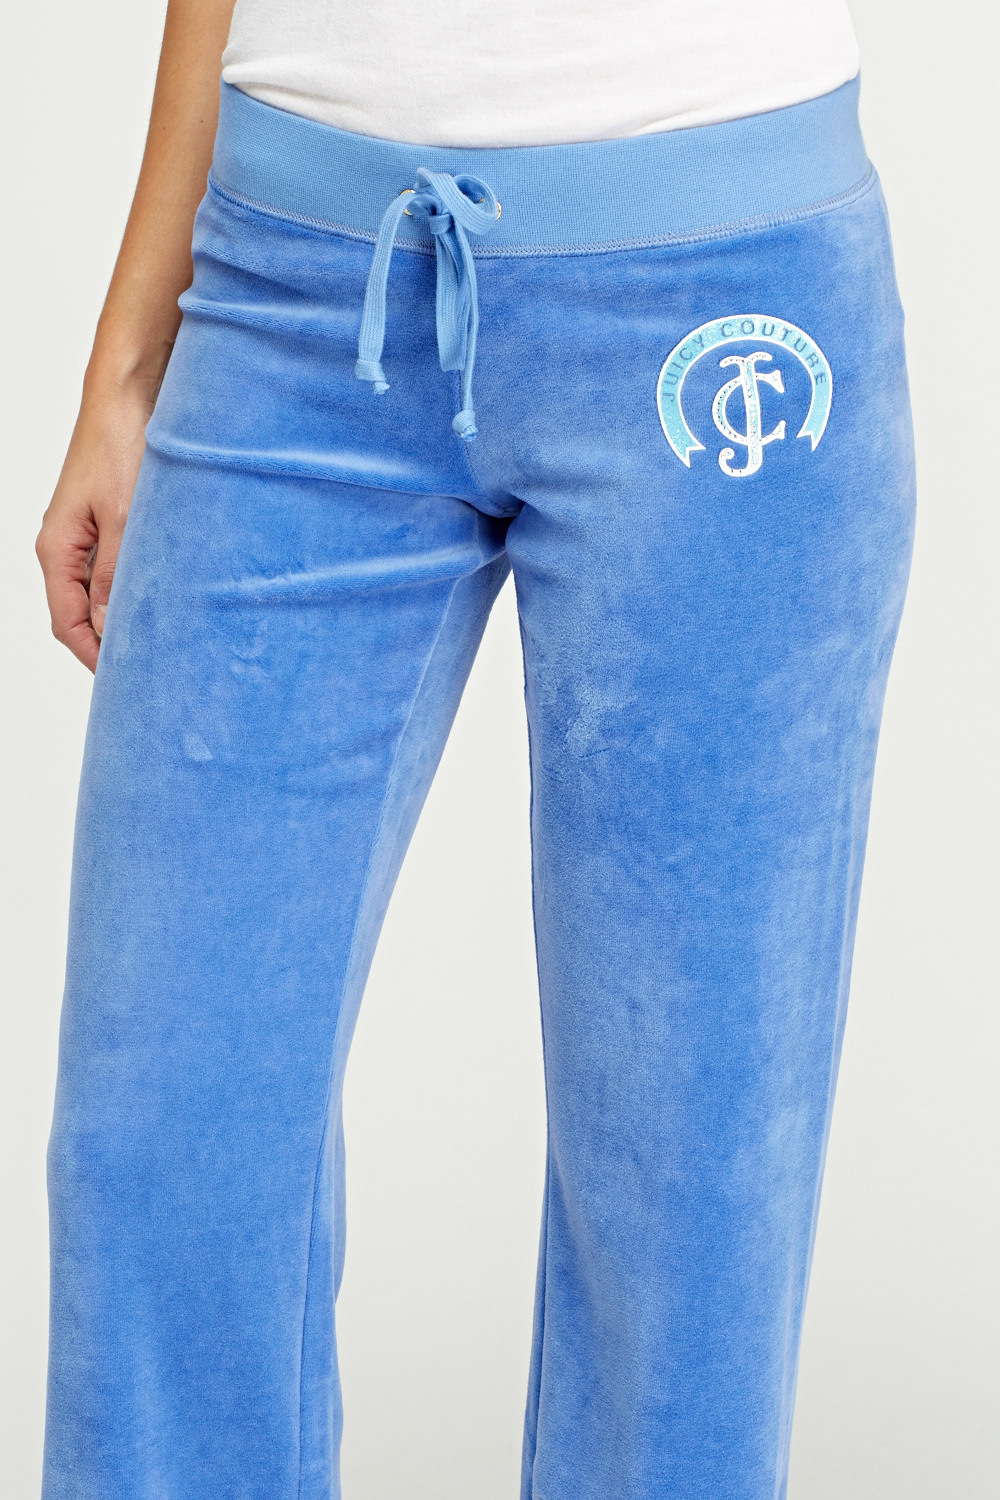 Juicy Couture Blue Velveteen Track Pants - Limited edition | Discount ...